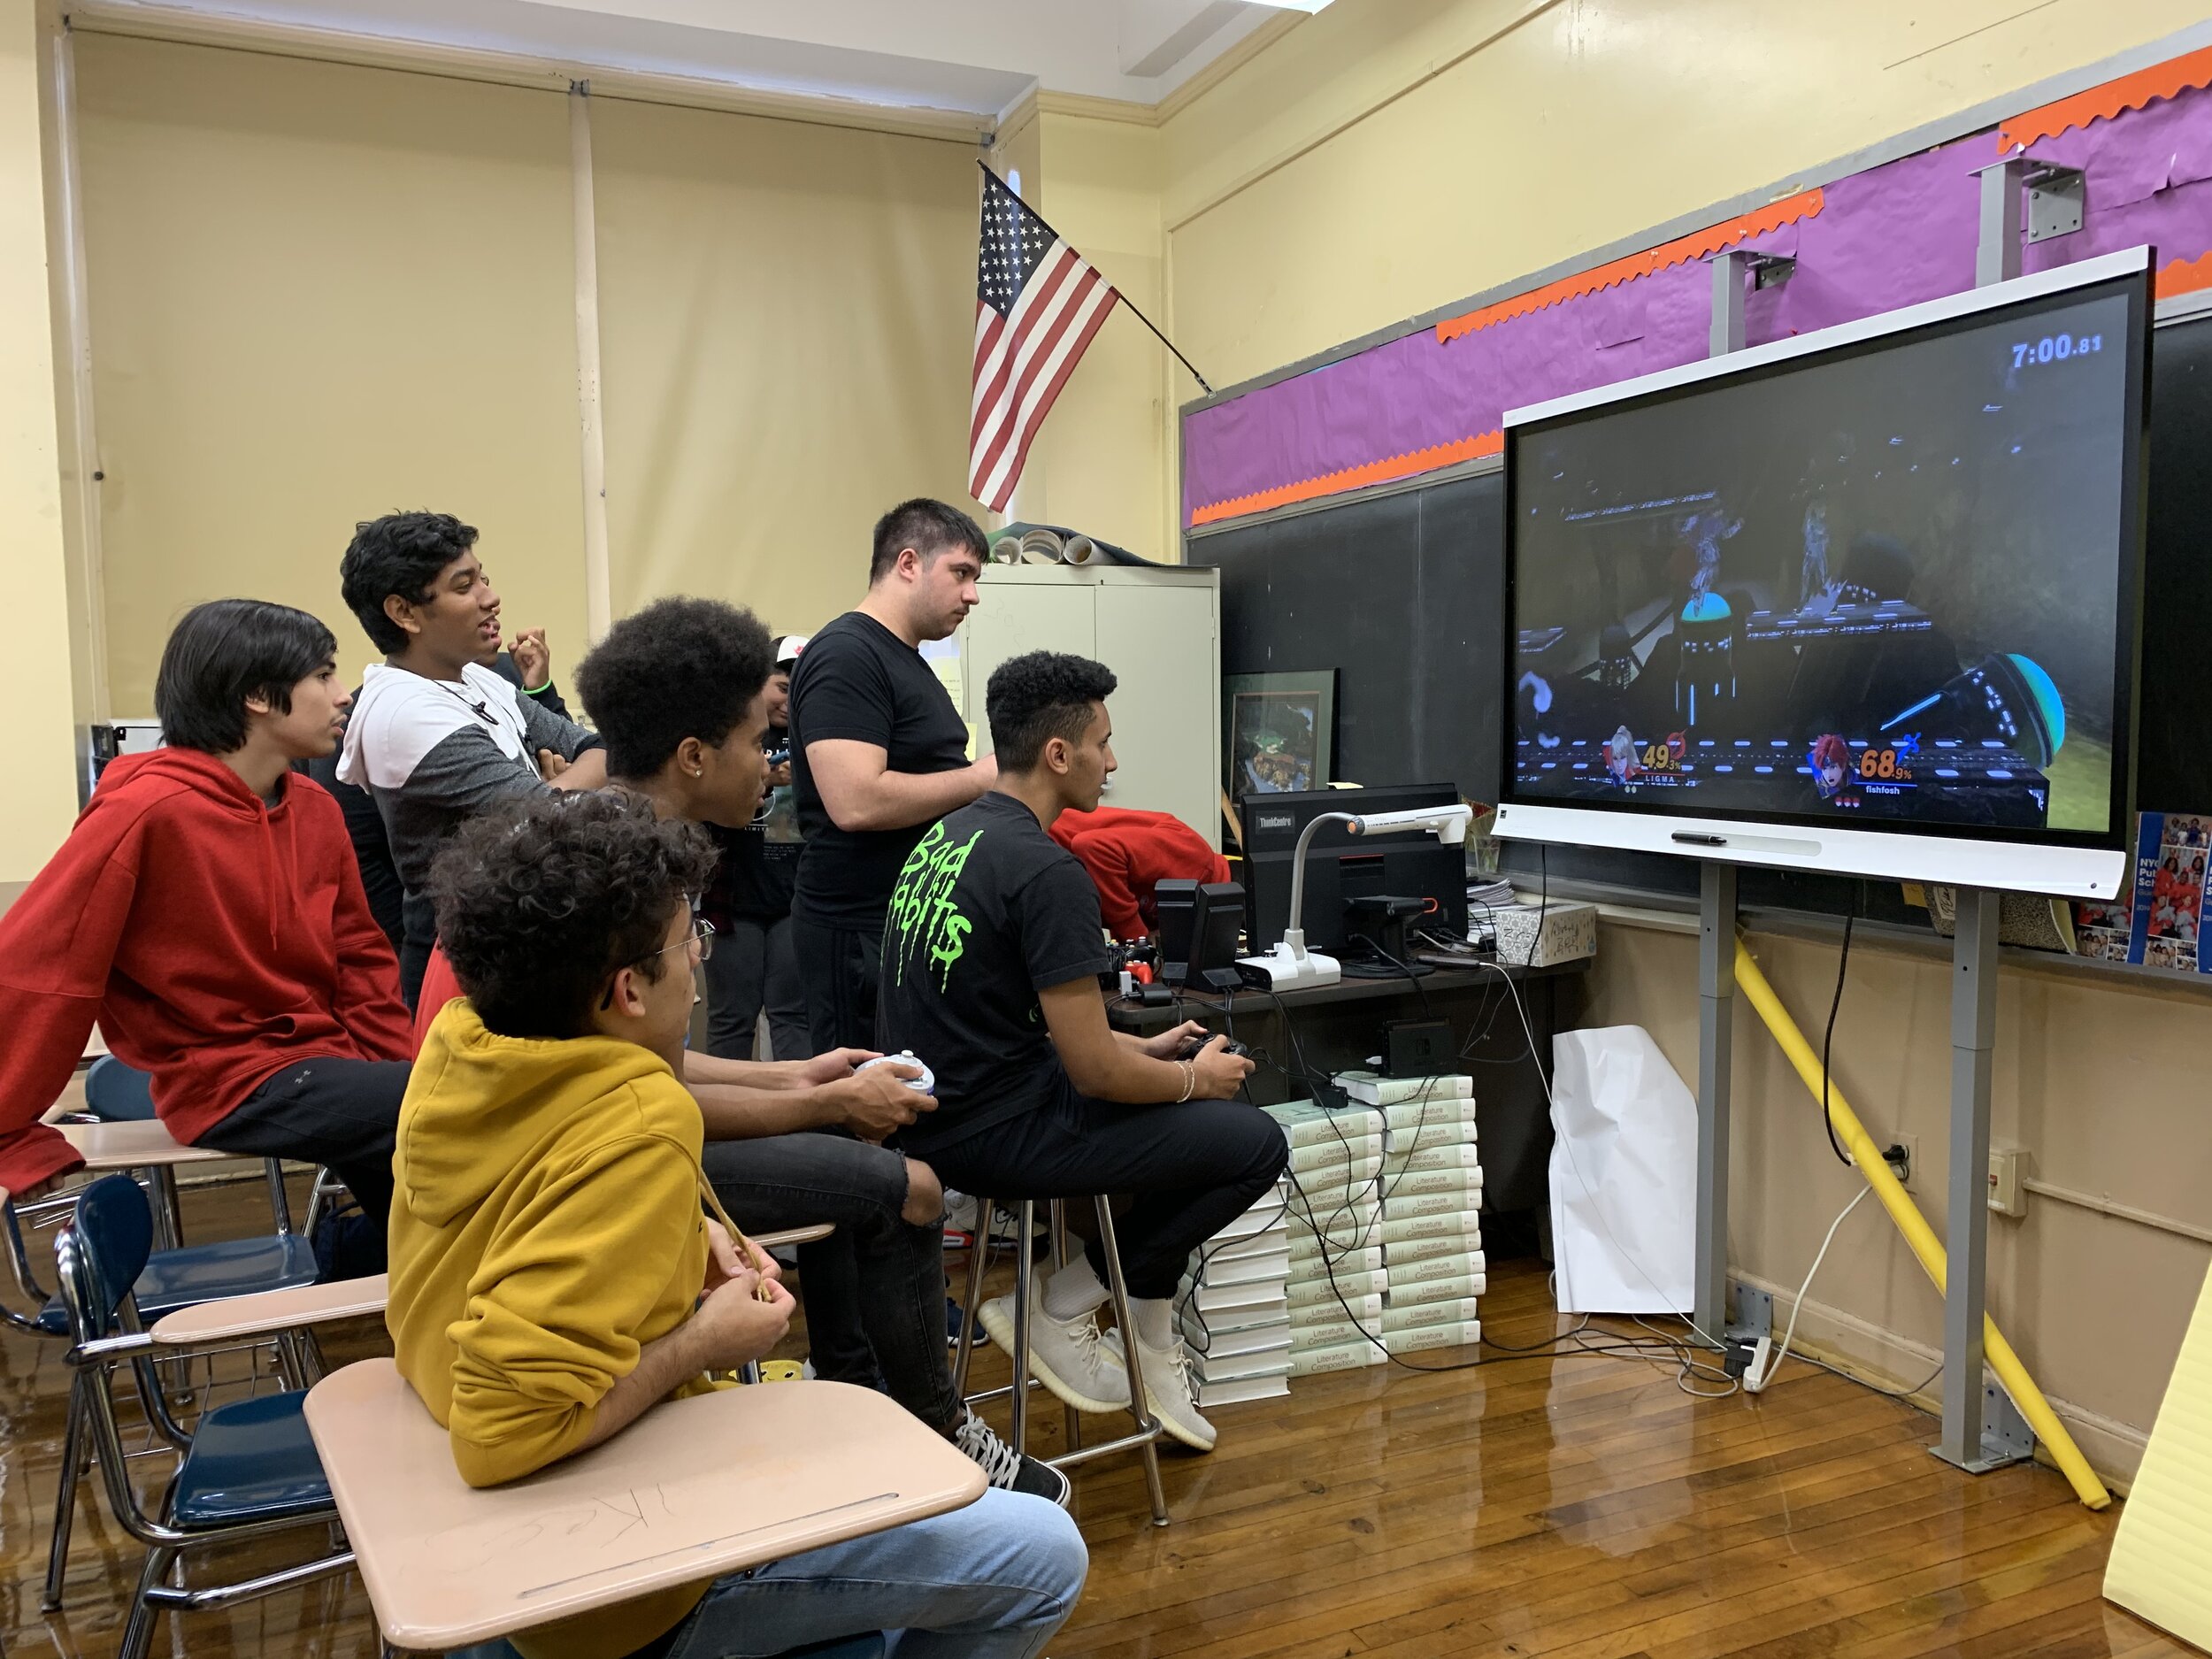 Can Video Games Help with School?